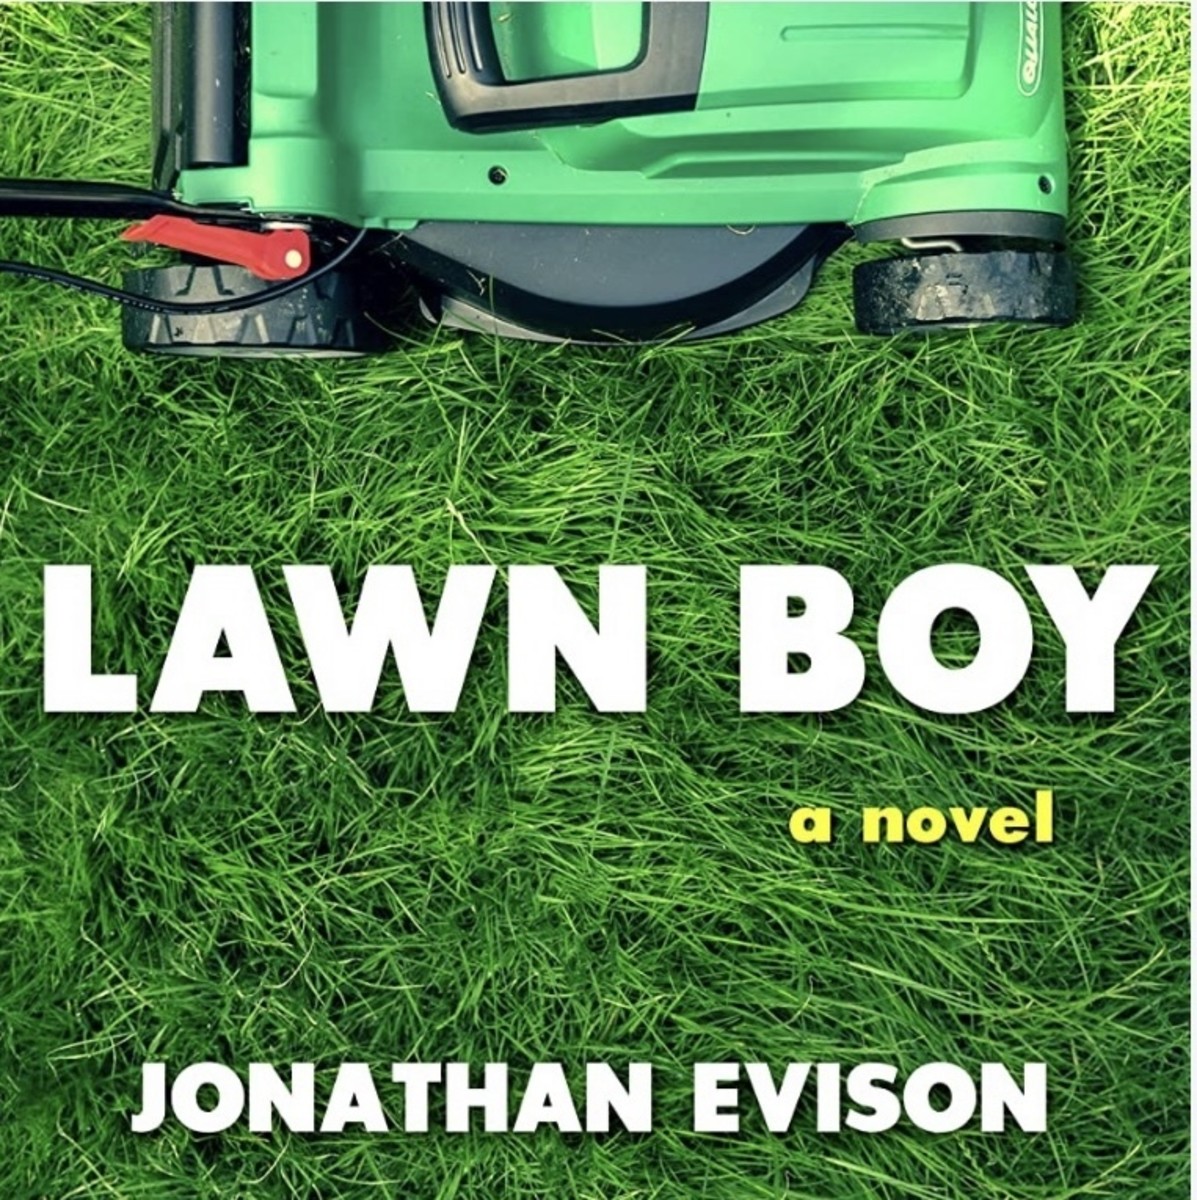 Audio Book Review: Lawn Boy by Jonathan Evison